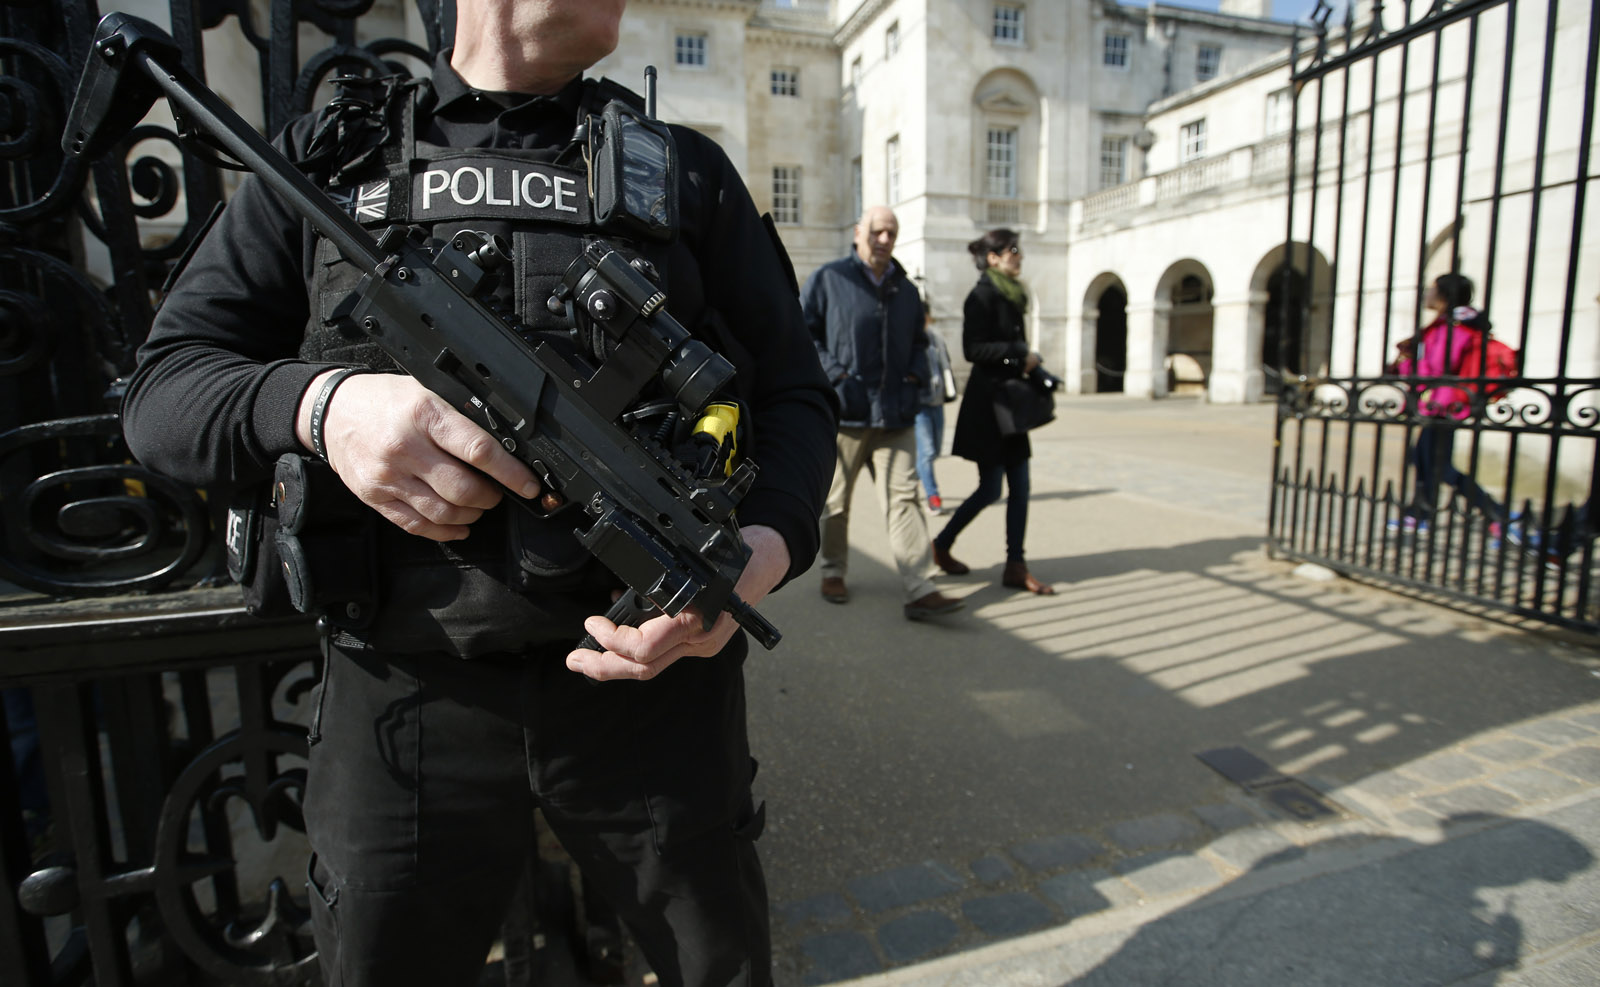 An armed British policeman stands on duty outside Horse Guards parade in central London, Tuesday, March 22, 2016. Authorities in Europe and beyond have tightened security at airports, on subways, at the borders and on city streets after deadly attacks Tuesday on the Brussels airport and its subway system. (AP Photo/Alastair Grant)